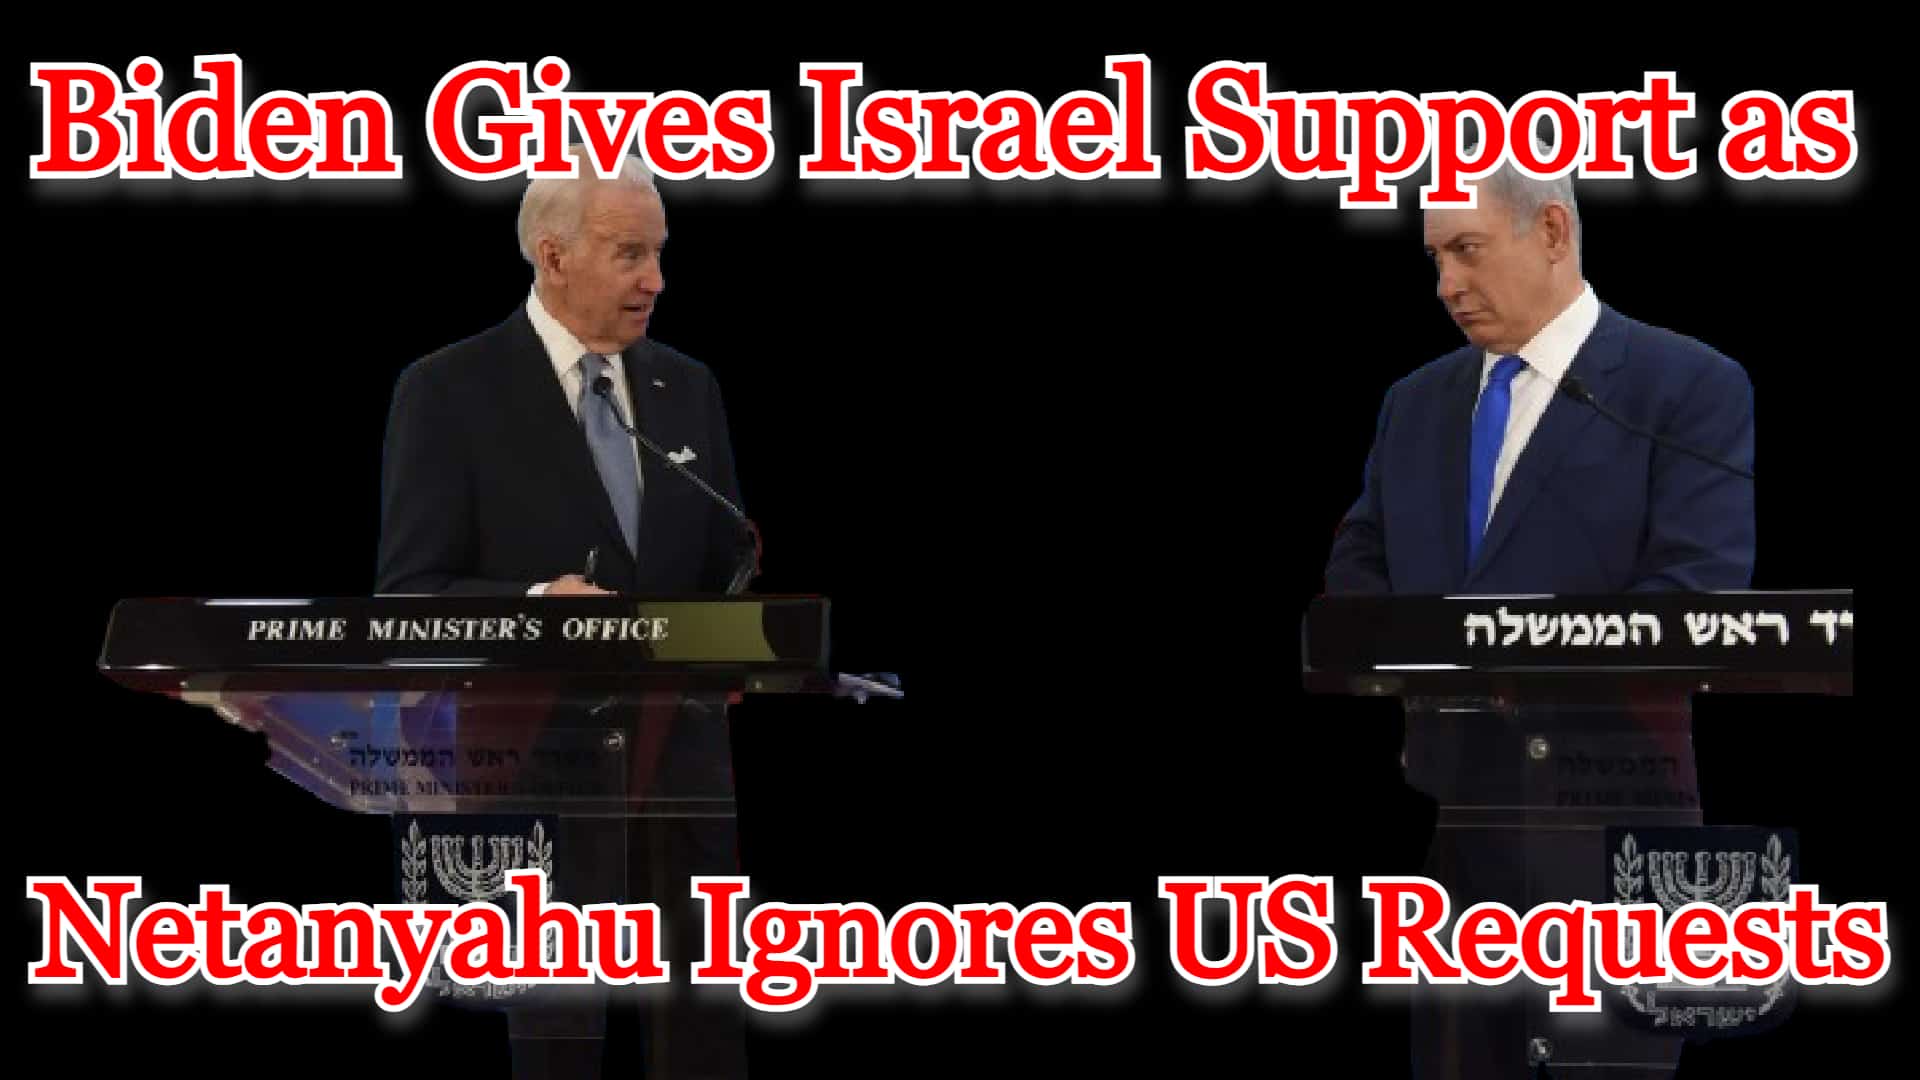 COI #514: Biden Gives Israel Support as Netanyahu Ignores US Requests